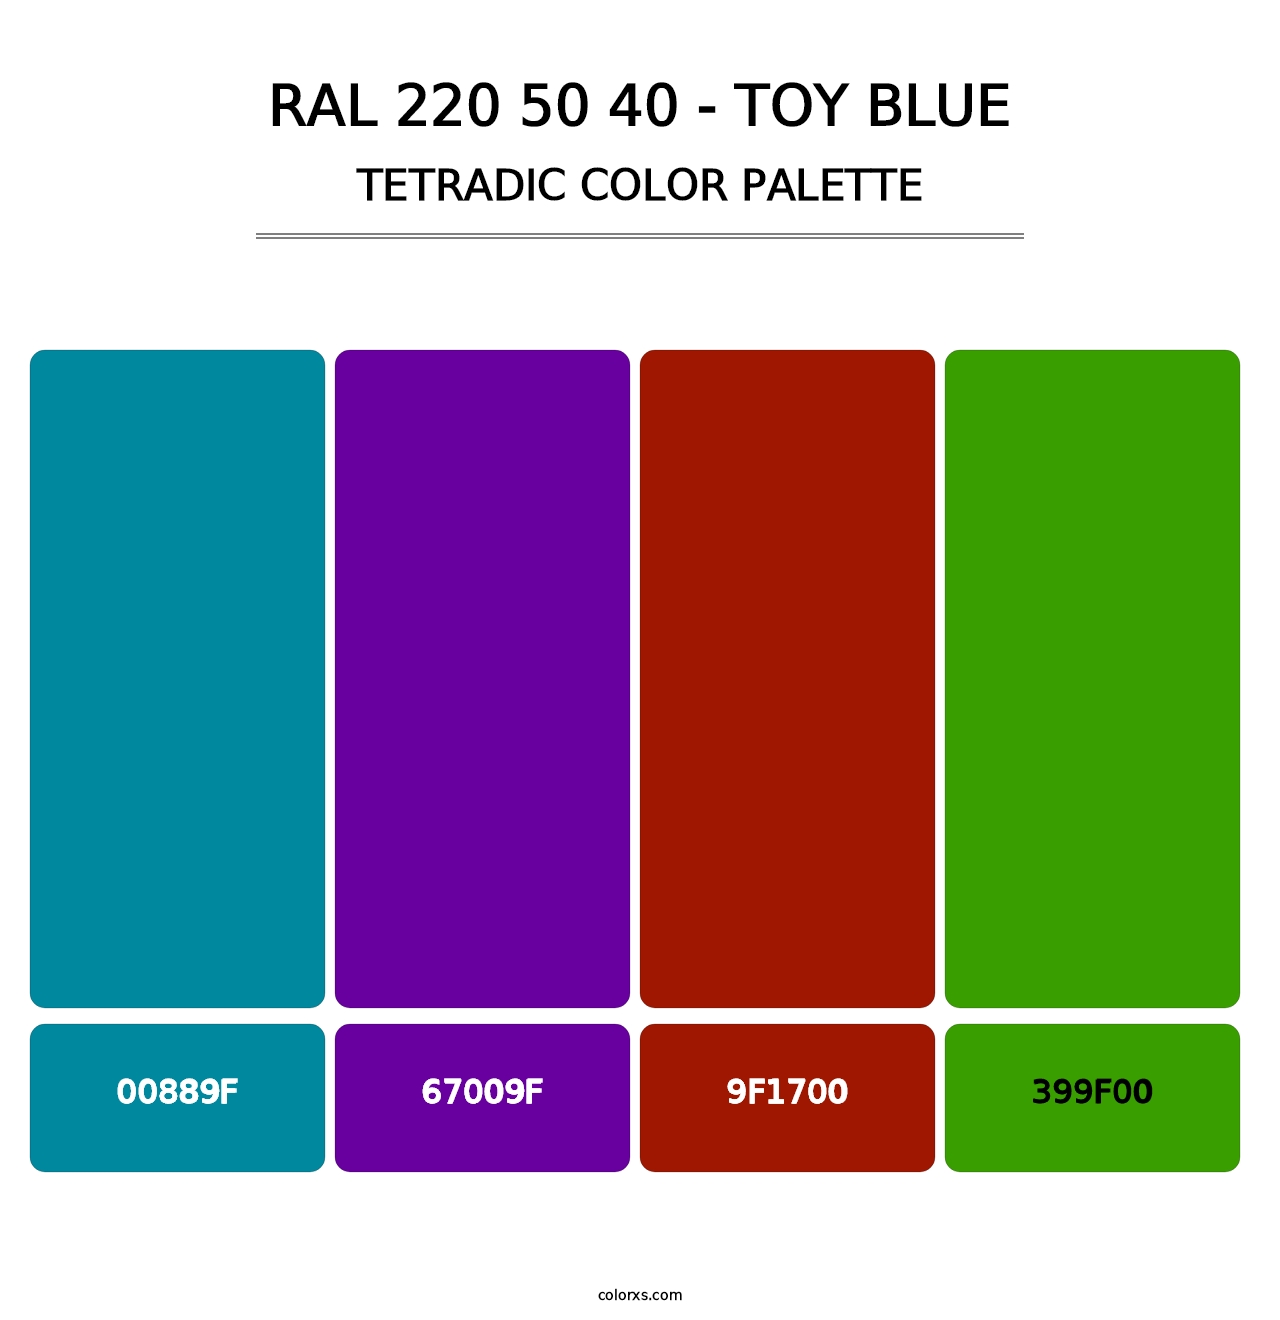 RAL 220 50 40 - Toy Blue - Tetradic Color Palette